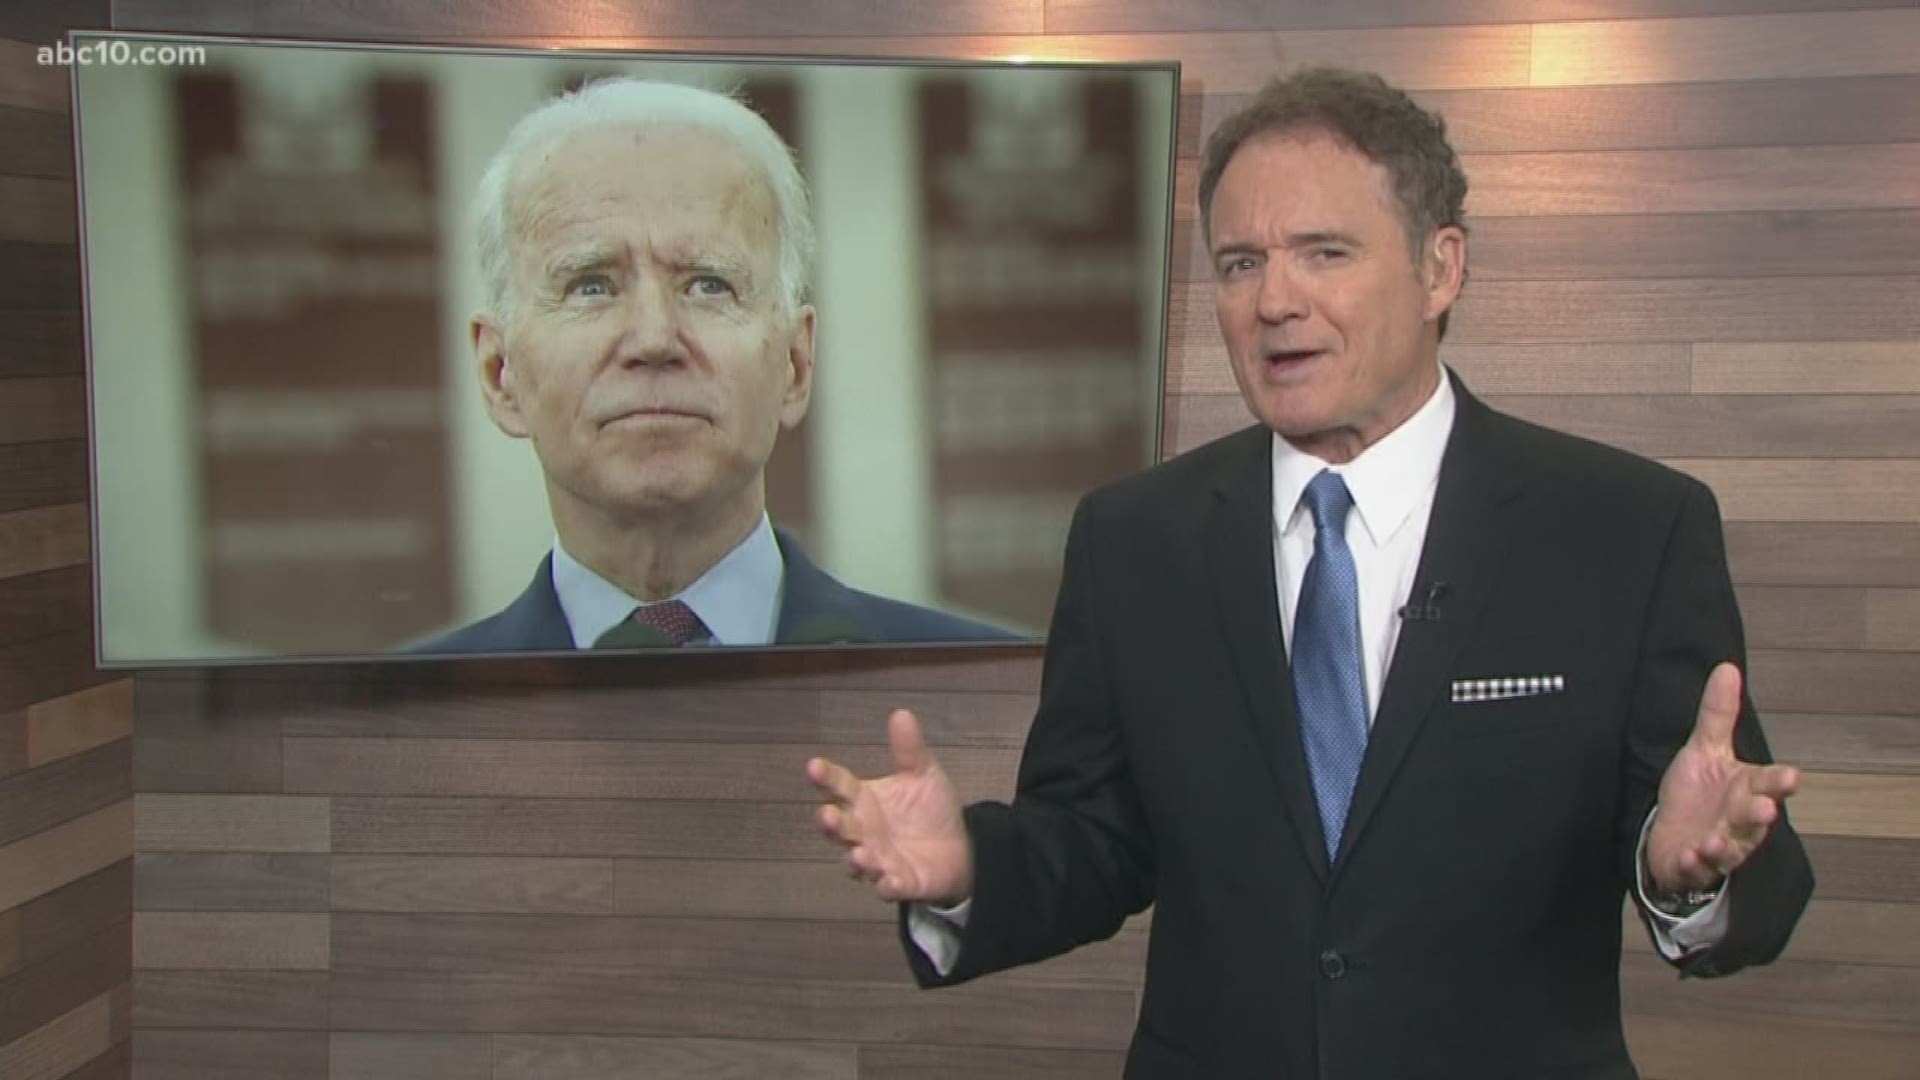 Joe Biden could all but clinch the nomination if he performs well on "Super Tuesday 2," but what makes his presidential run better this time around? Walt has more.